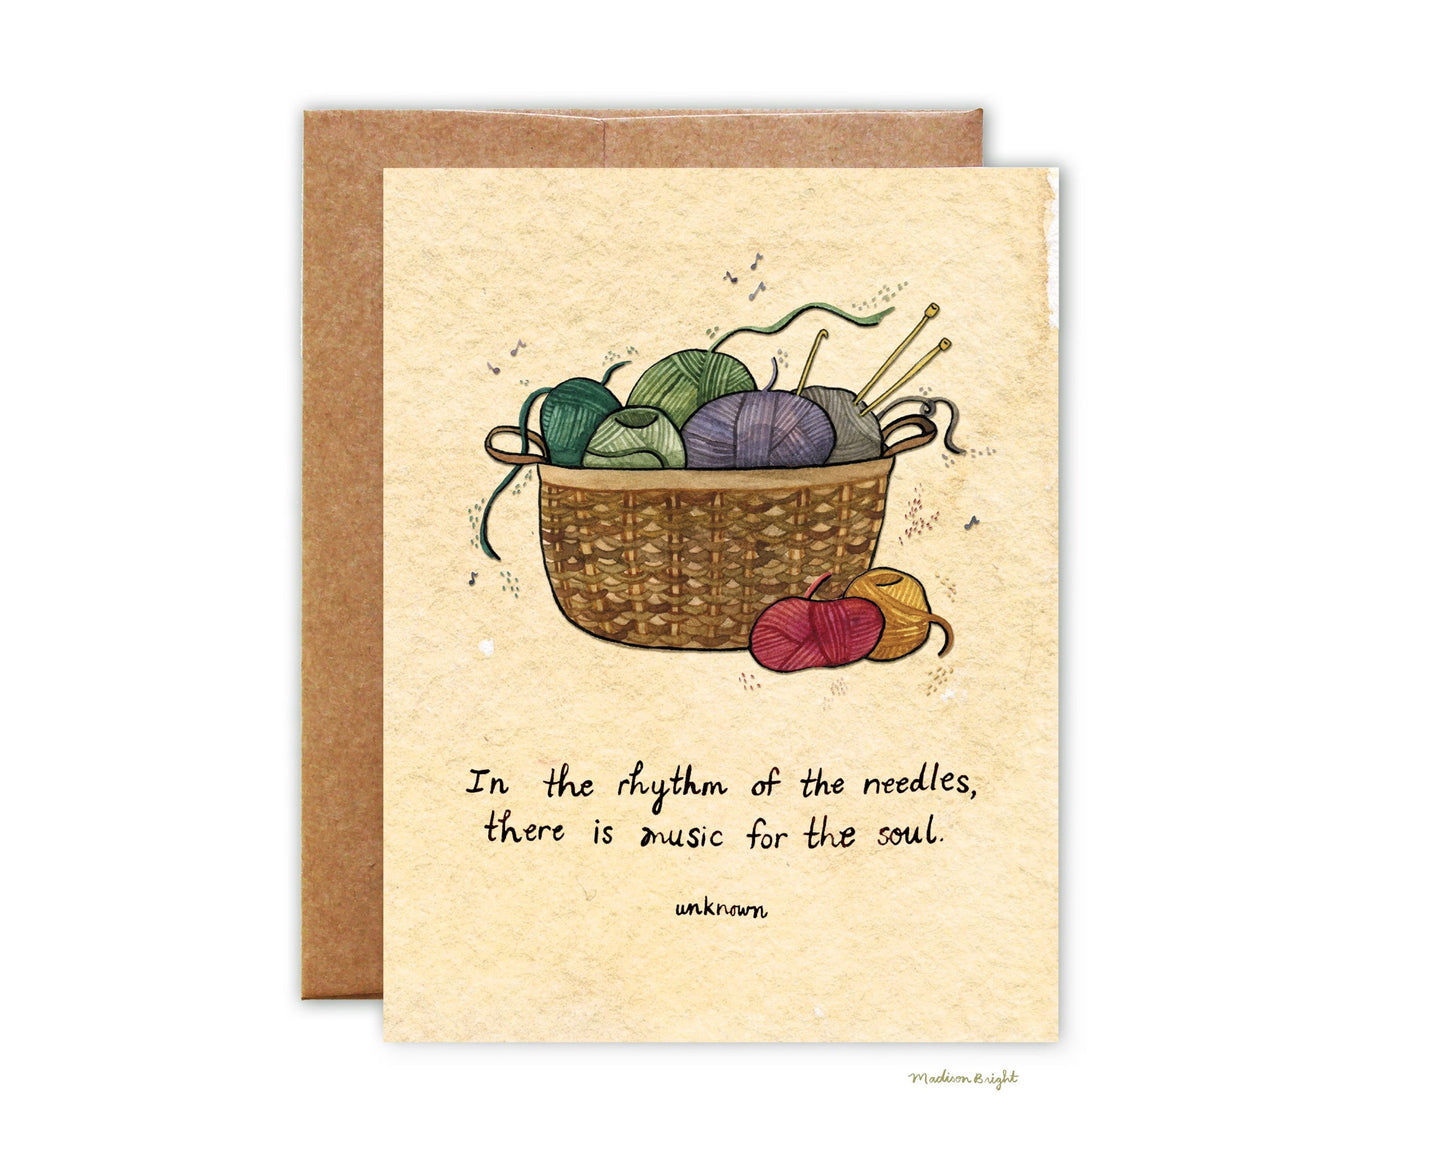 The Rhythm of the Needles - Knitting Greeting Card